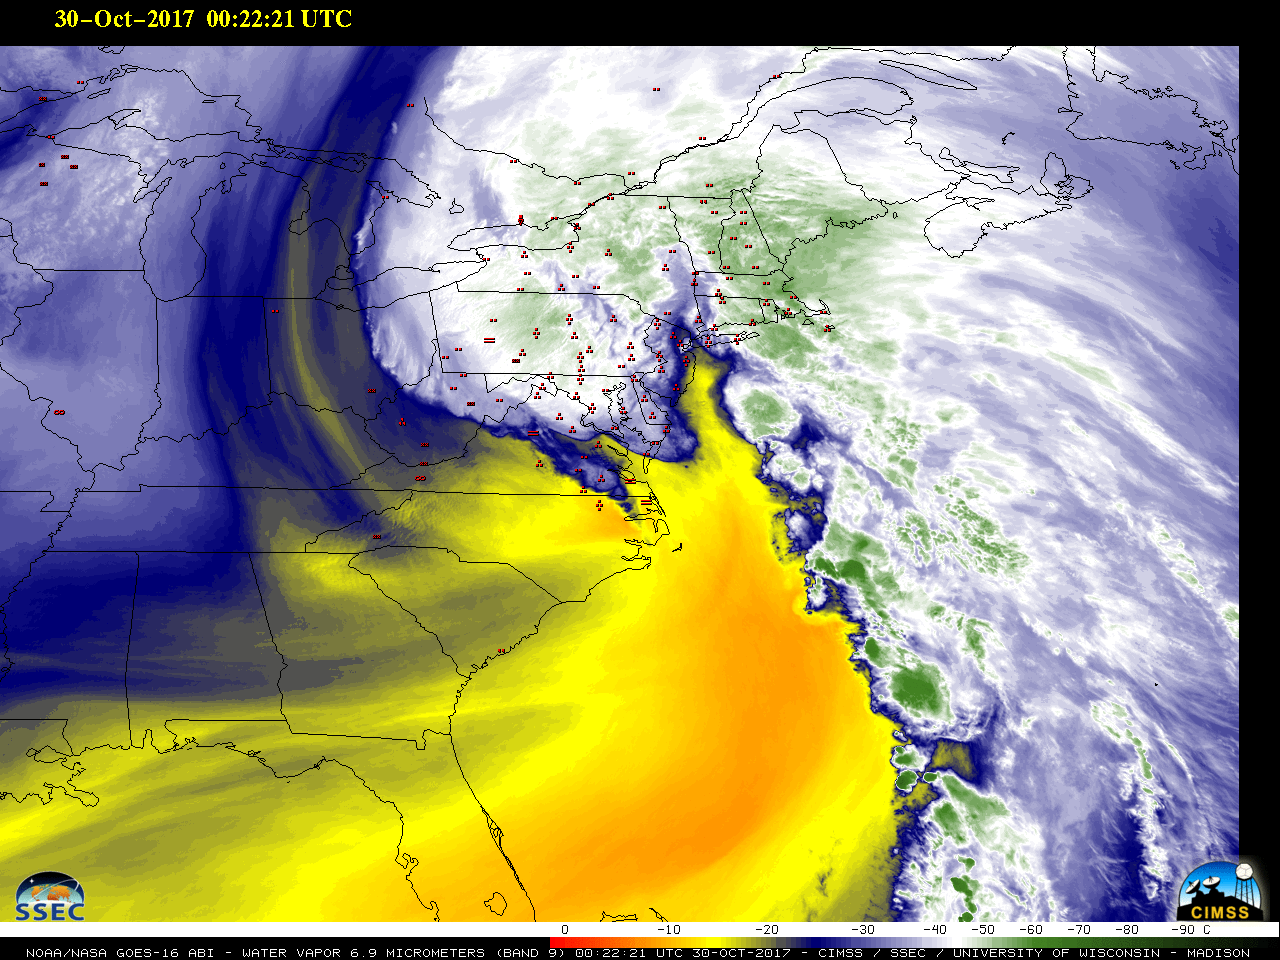 GOES-16 Mid-level Water Vapor (6.9 µm) images, with hourly precipitation type symbols plotted in red [click to play MP4 animation]